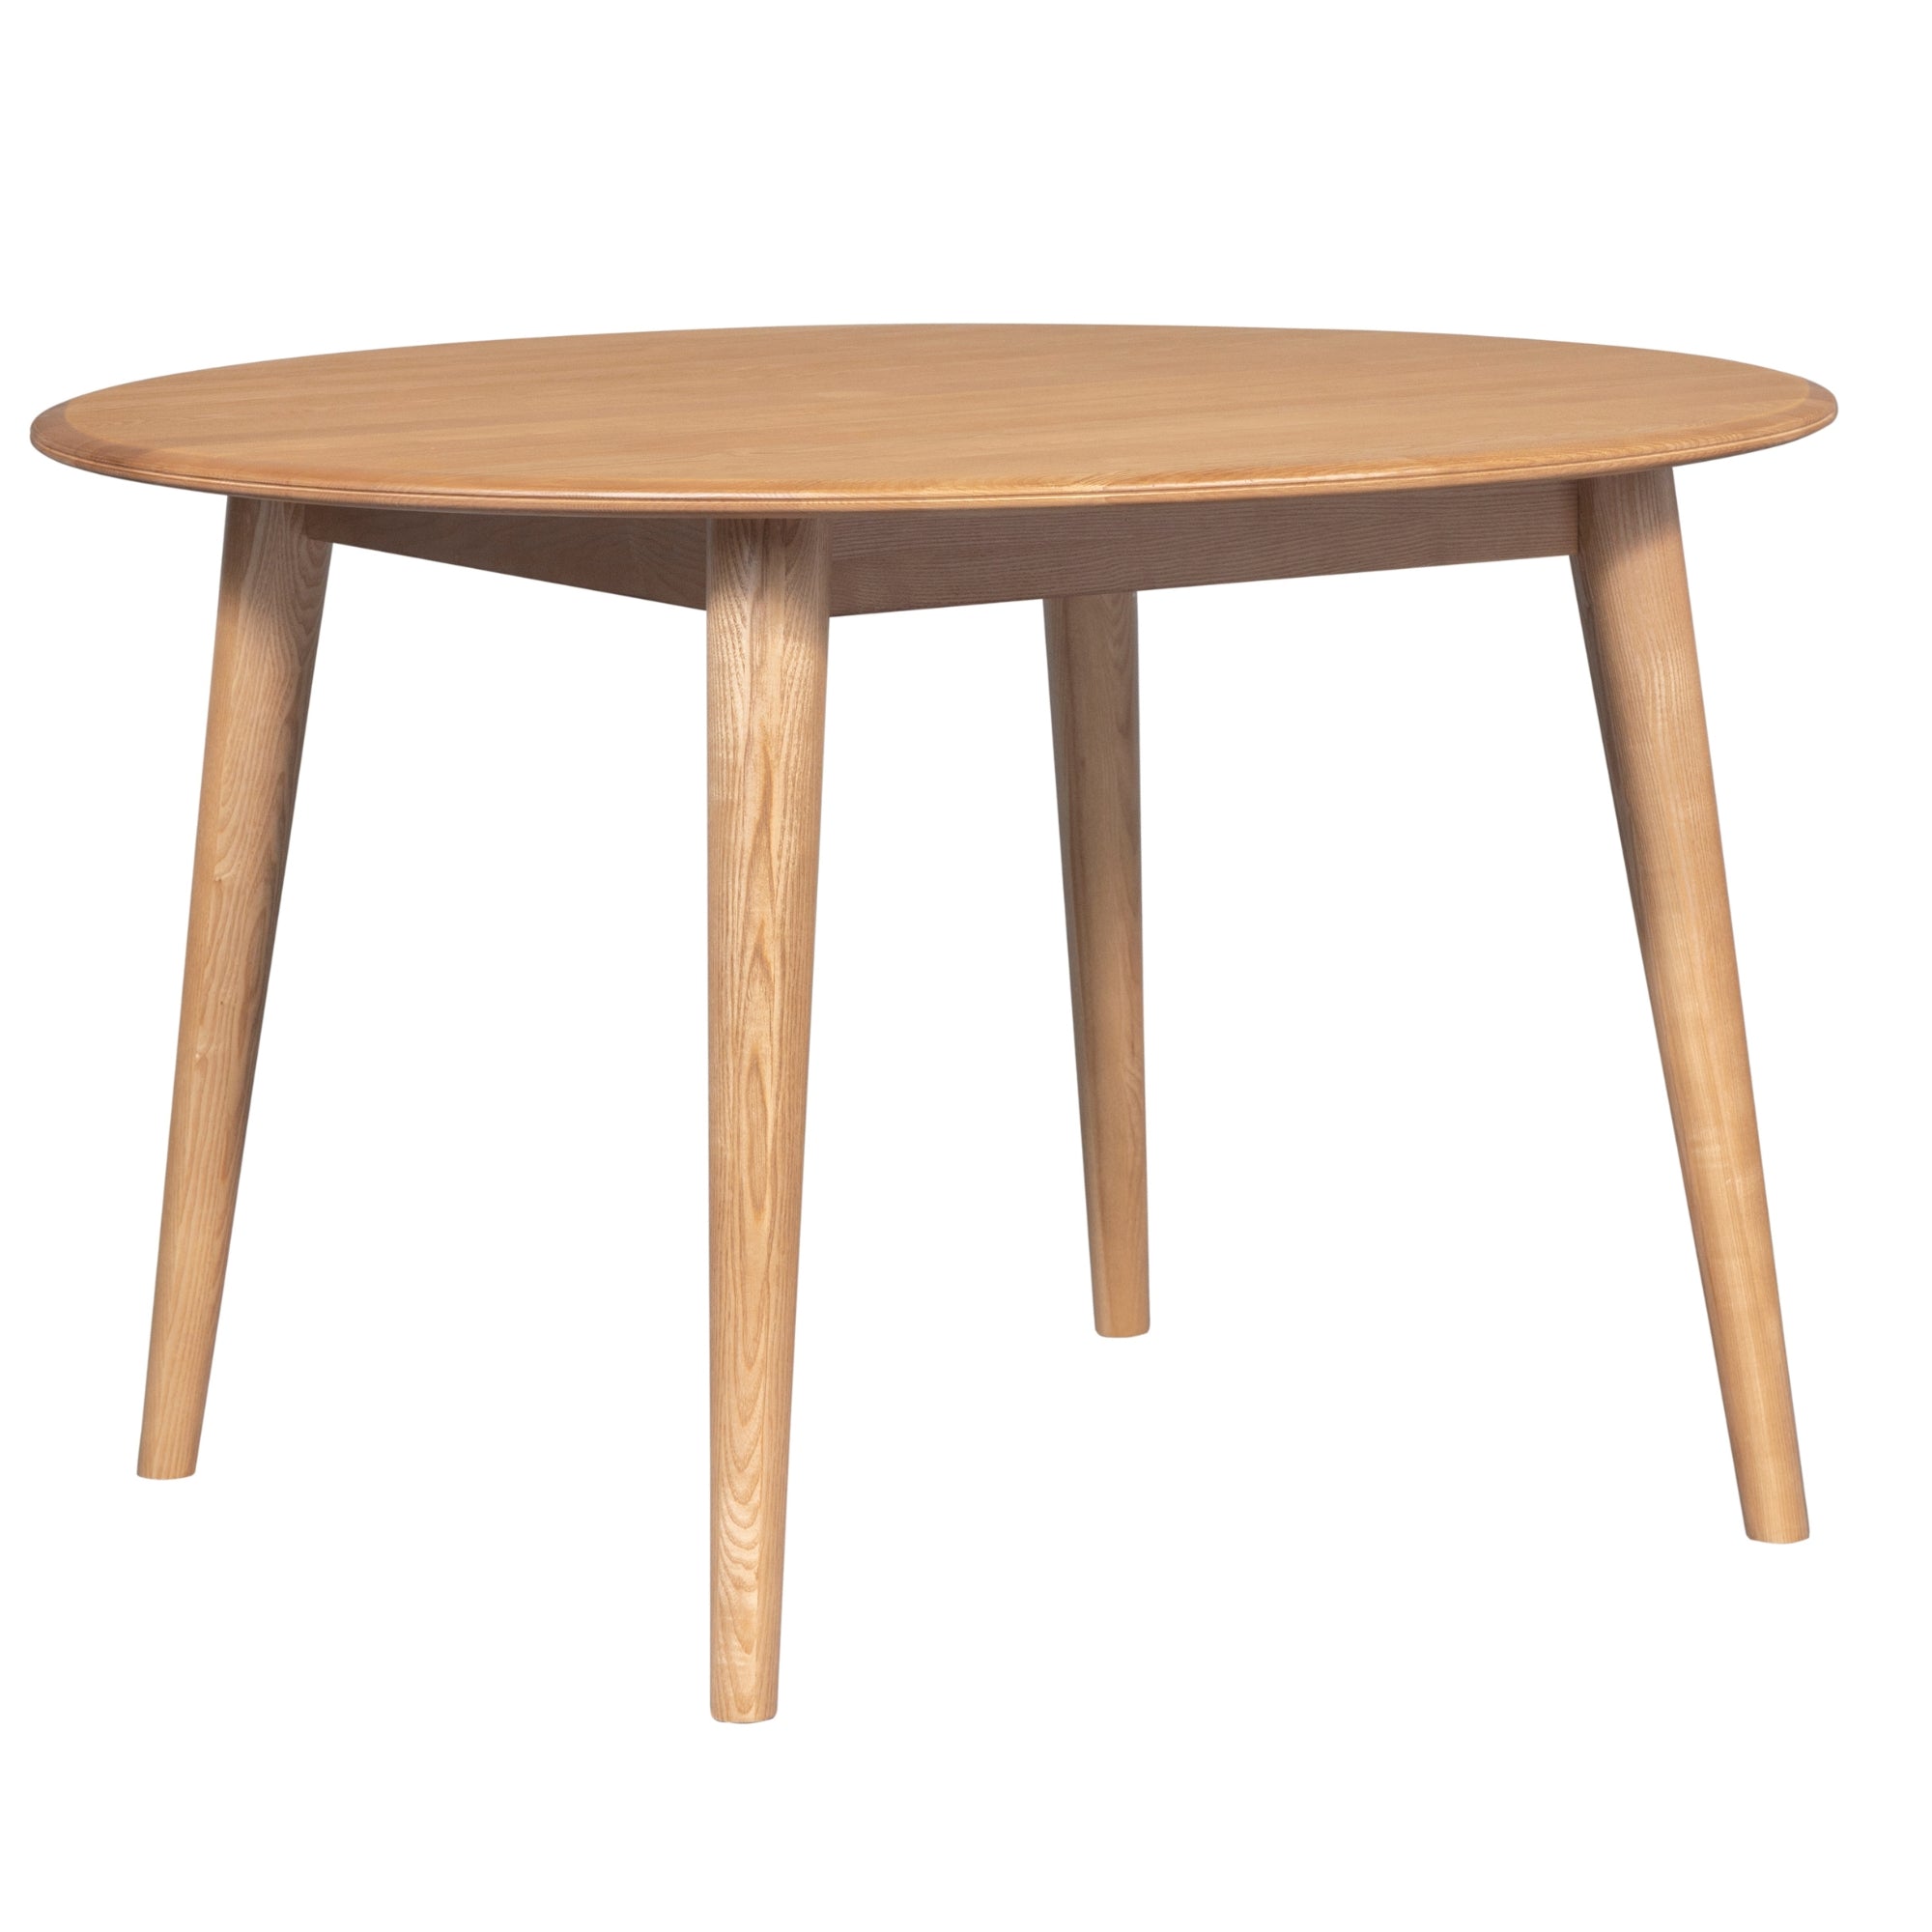 120cm Round Solid Ash Wood Dining Table, 4-Seater, Oak